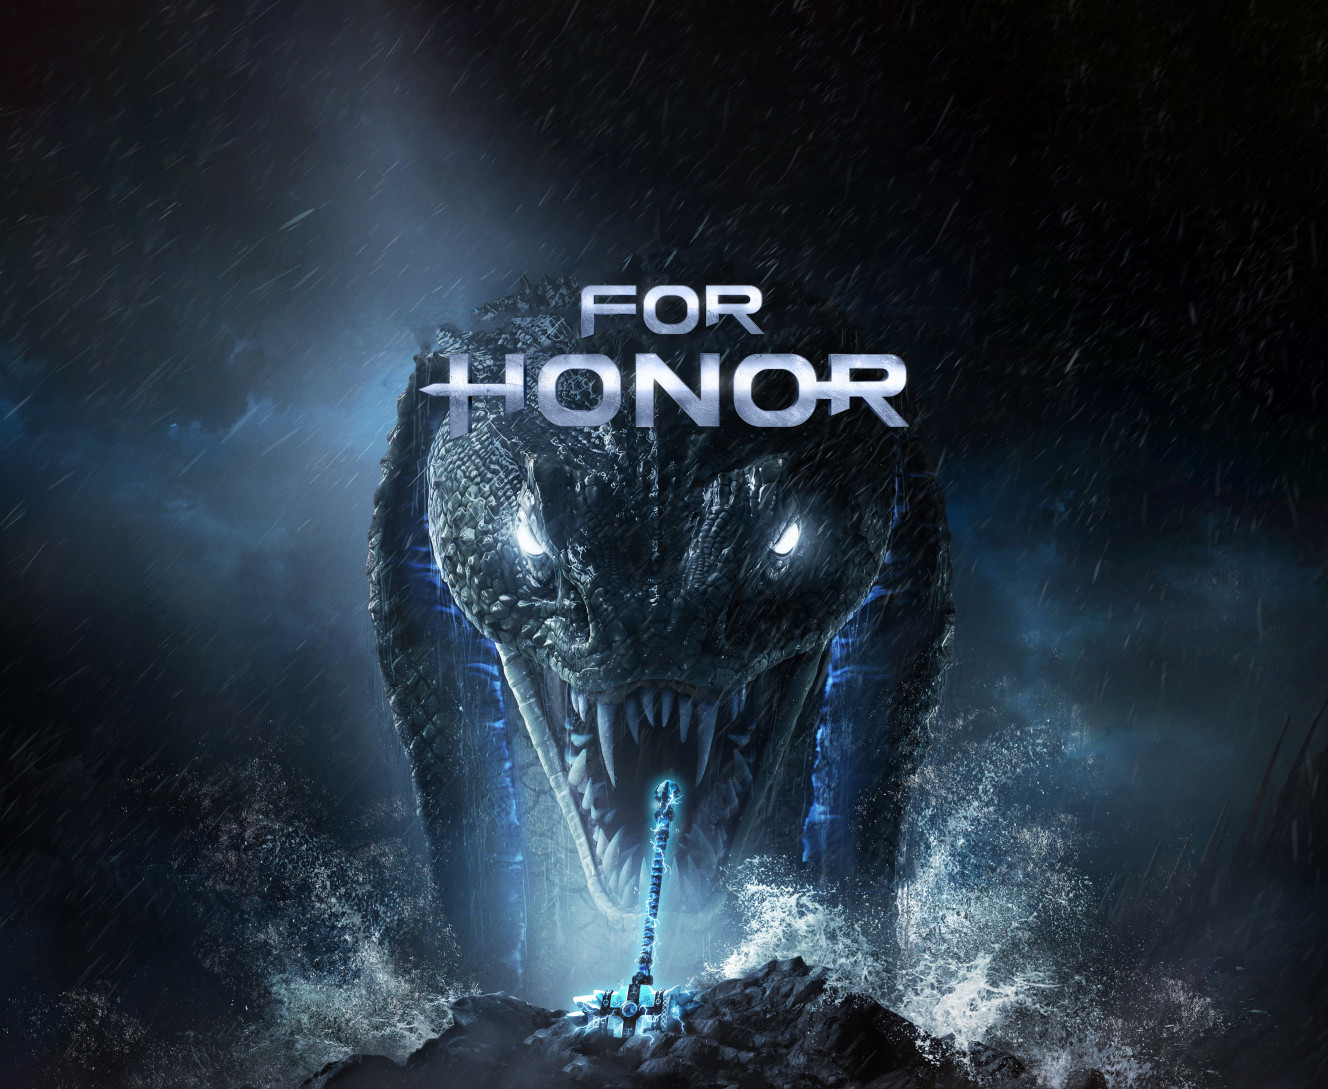 FOR HONOR [2]